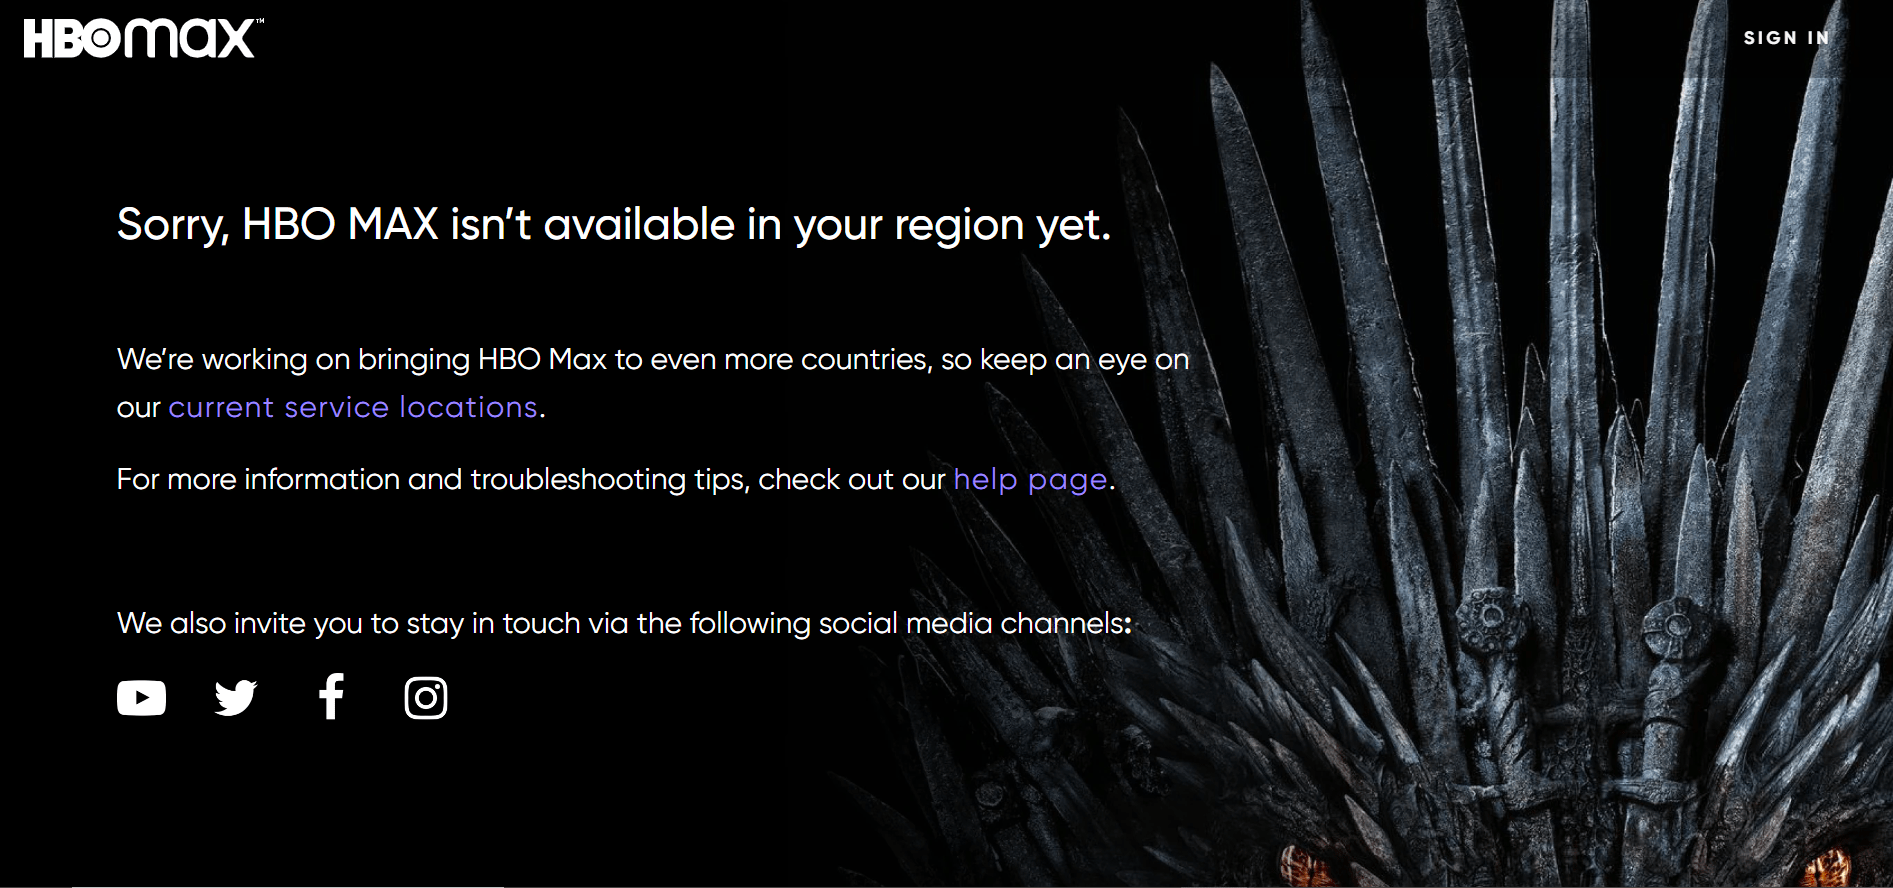 Why Do You Need a VPN to Watch HBO Max in Brazil?